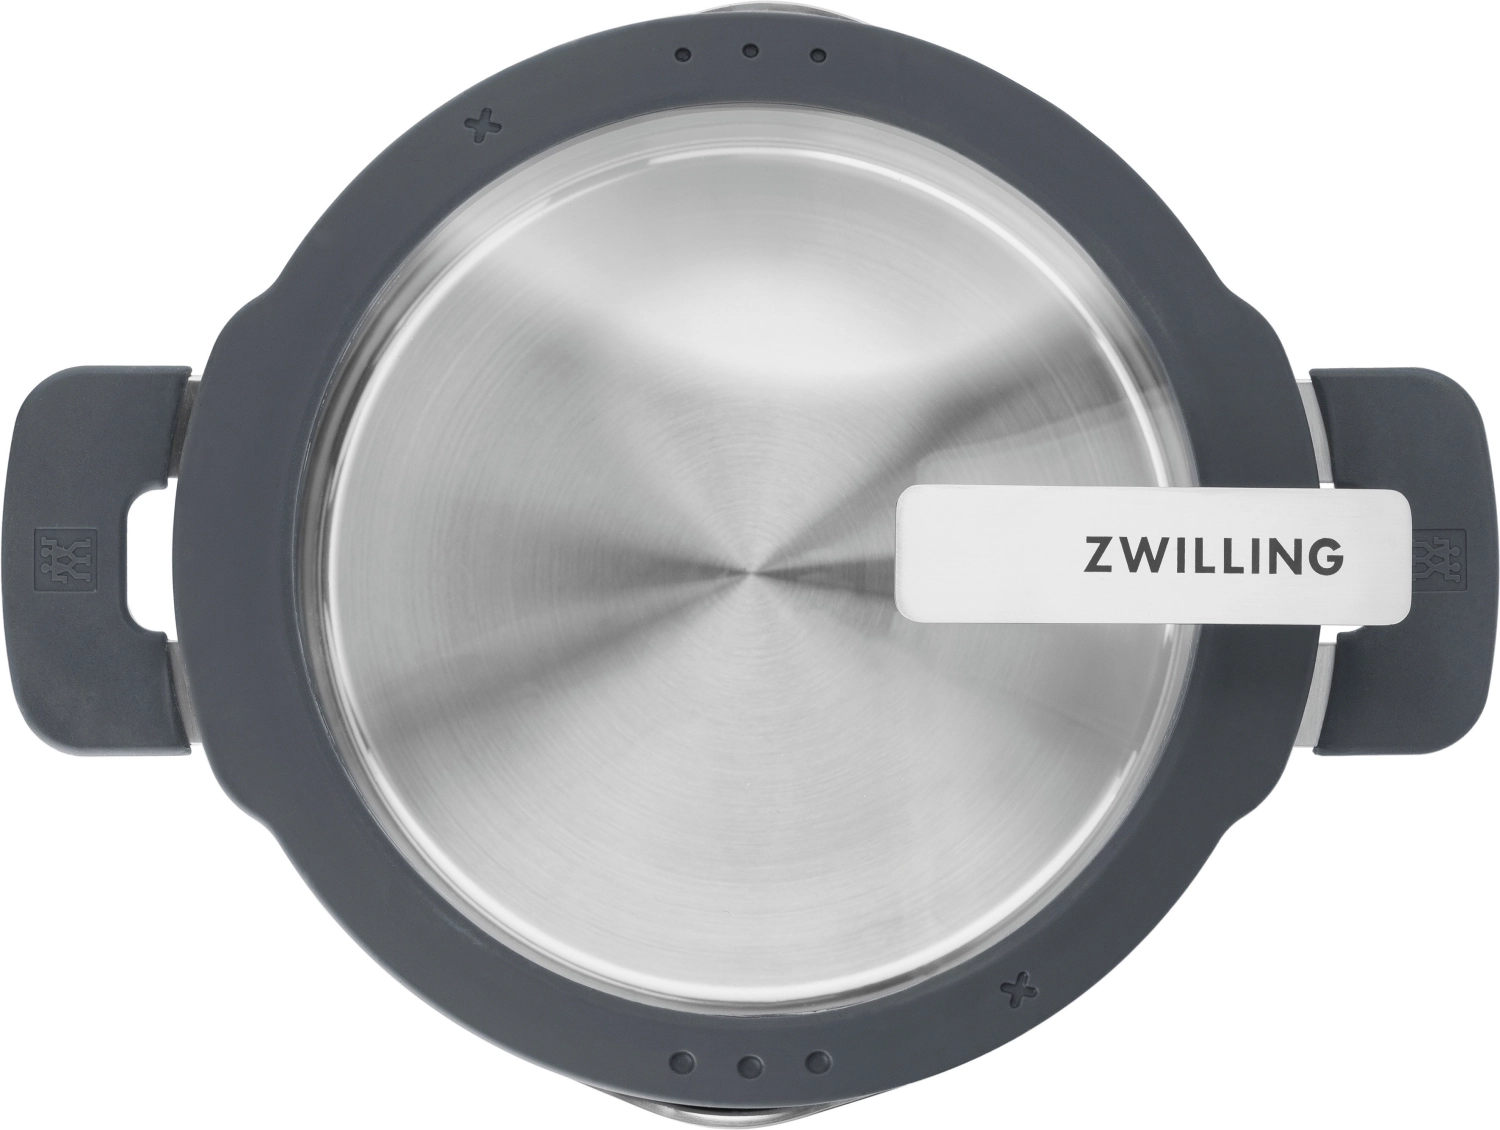 Zwilling simplify cocotte, 20 cm